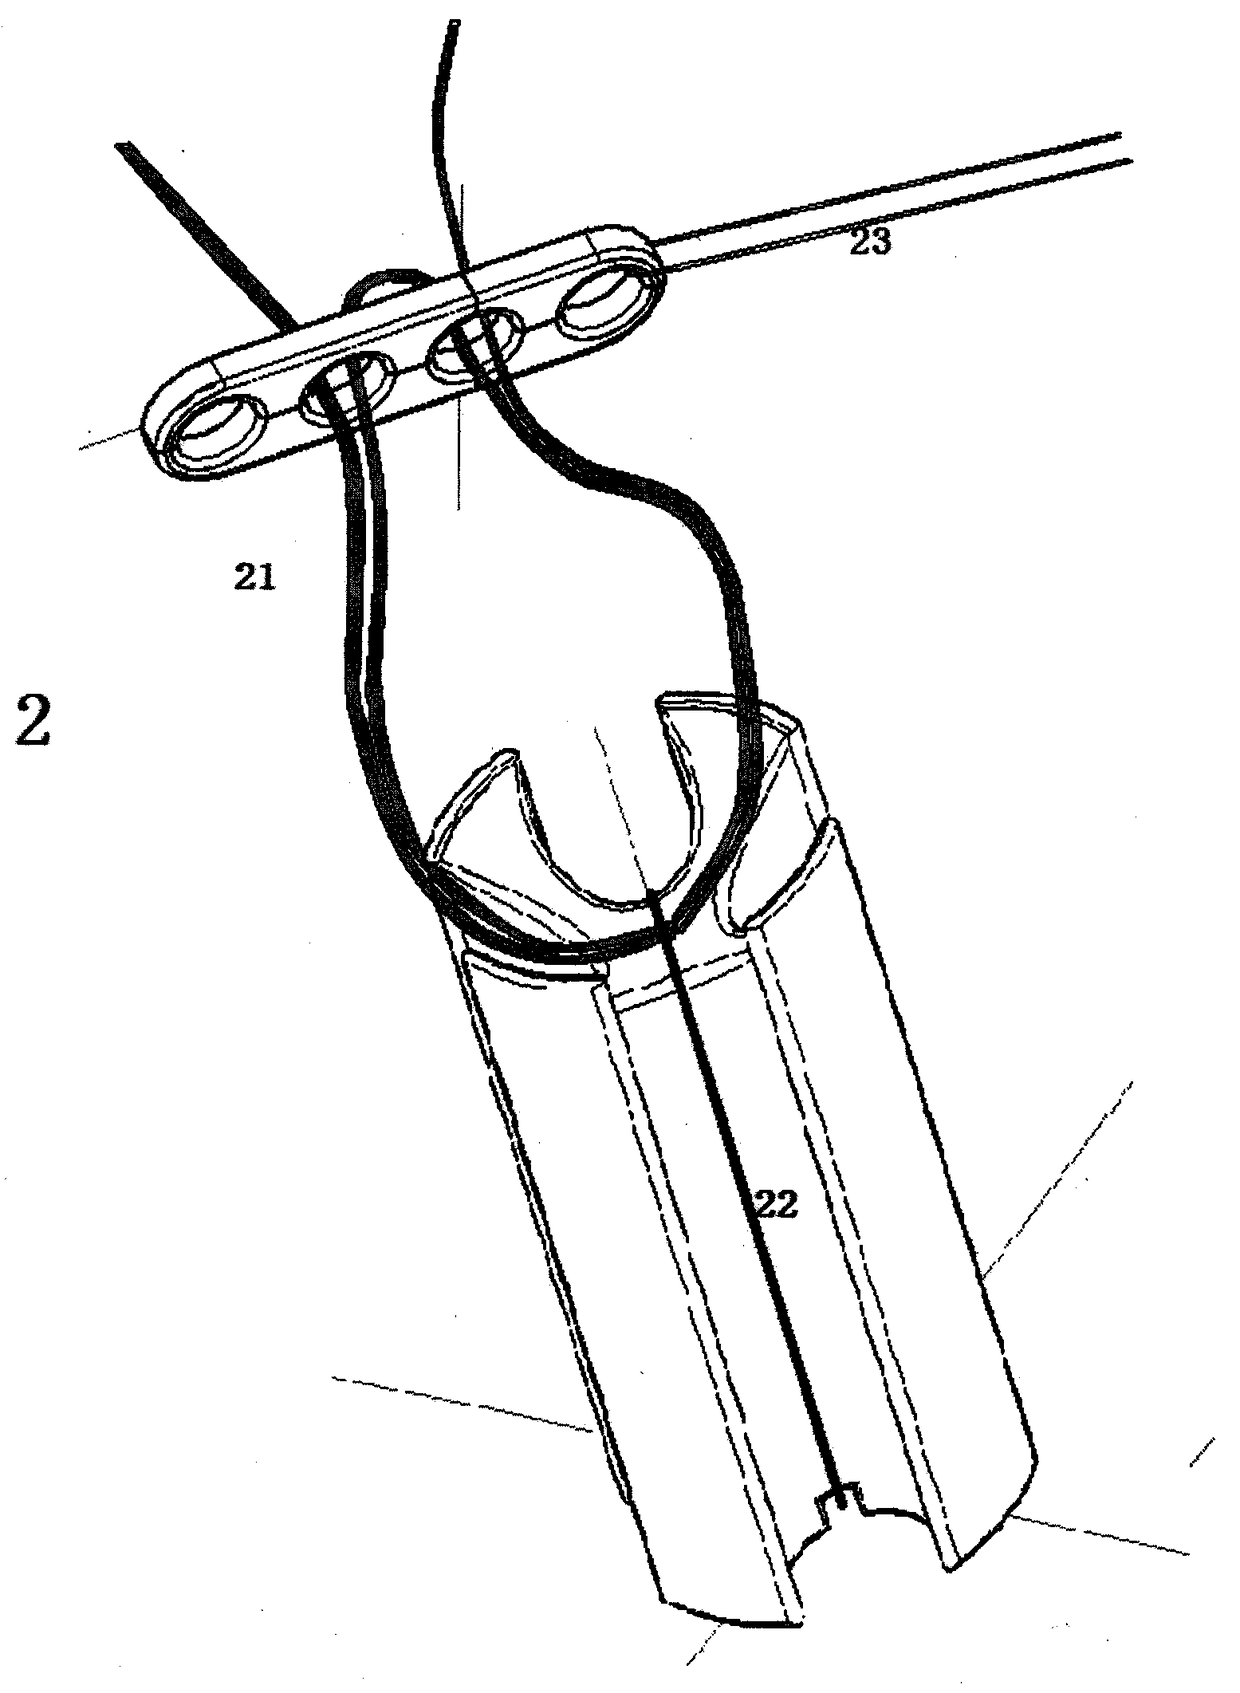 Ligament fixation system comprising suspensory steel plate and absorbable implant